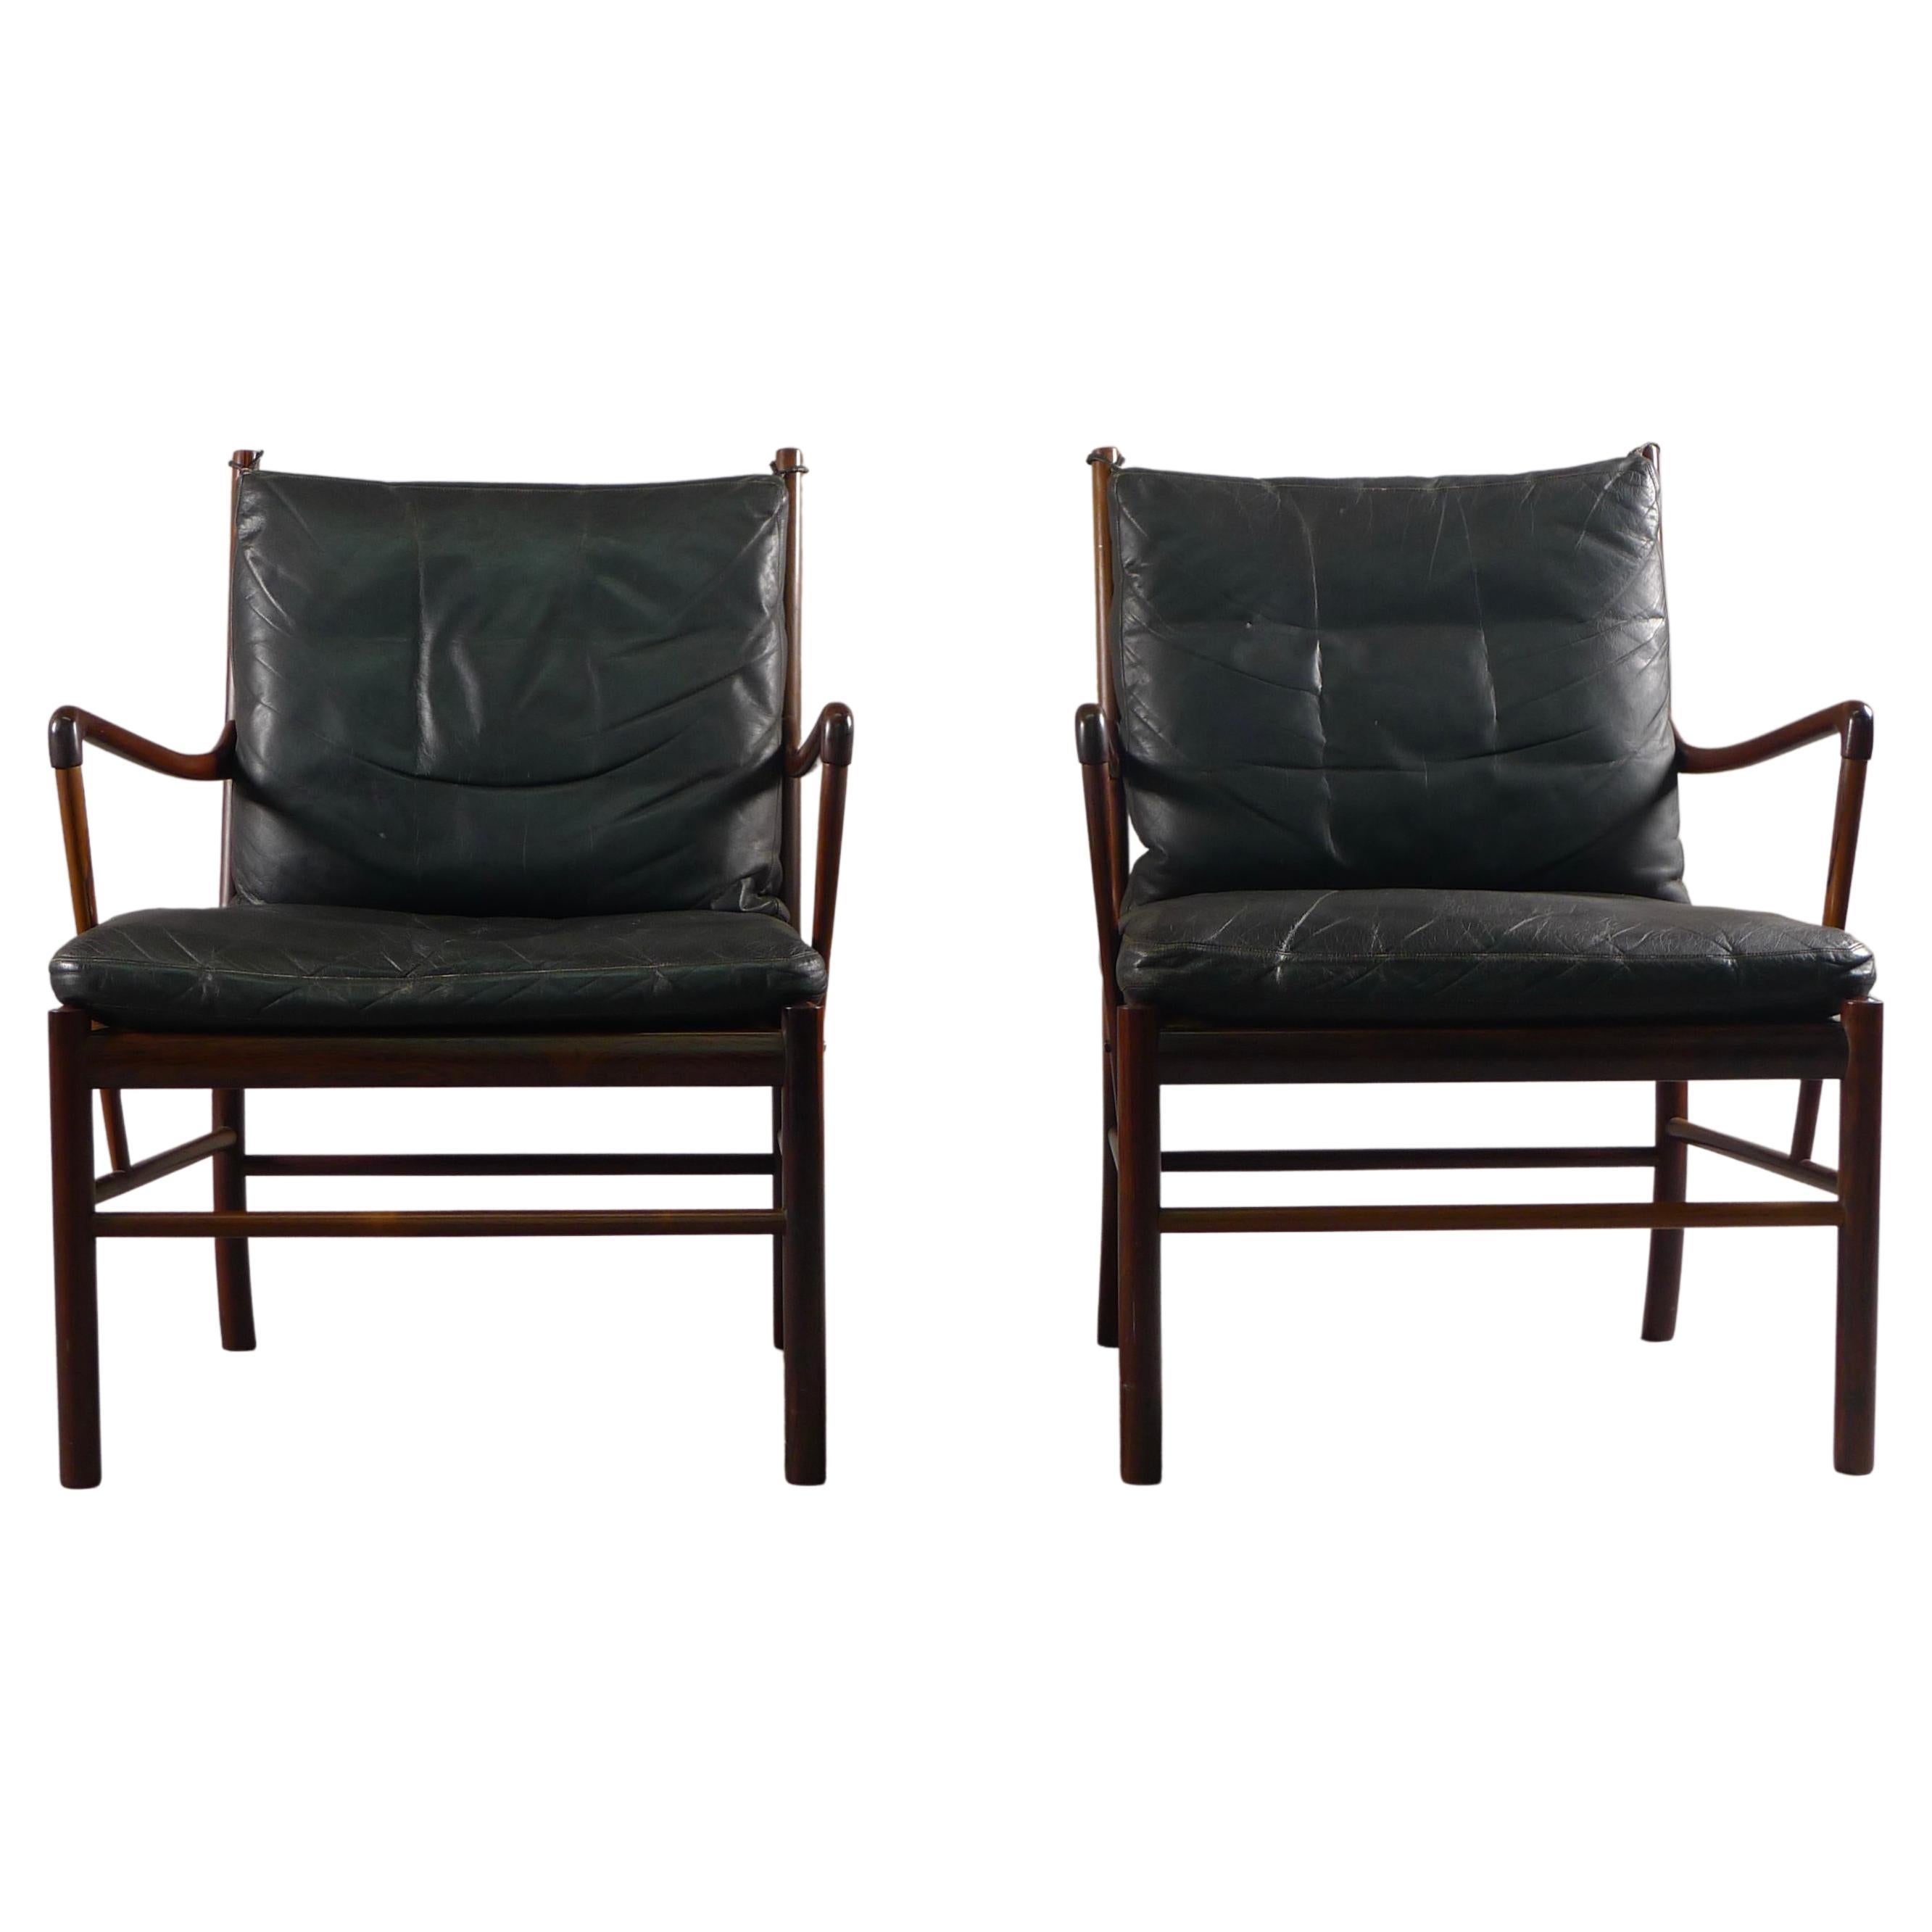 Ole Wanscher Pair of Colonial Chairs in Rosewood, Manufacturers Labels, 1950's